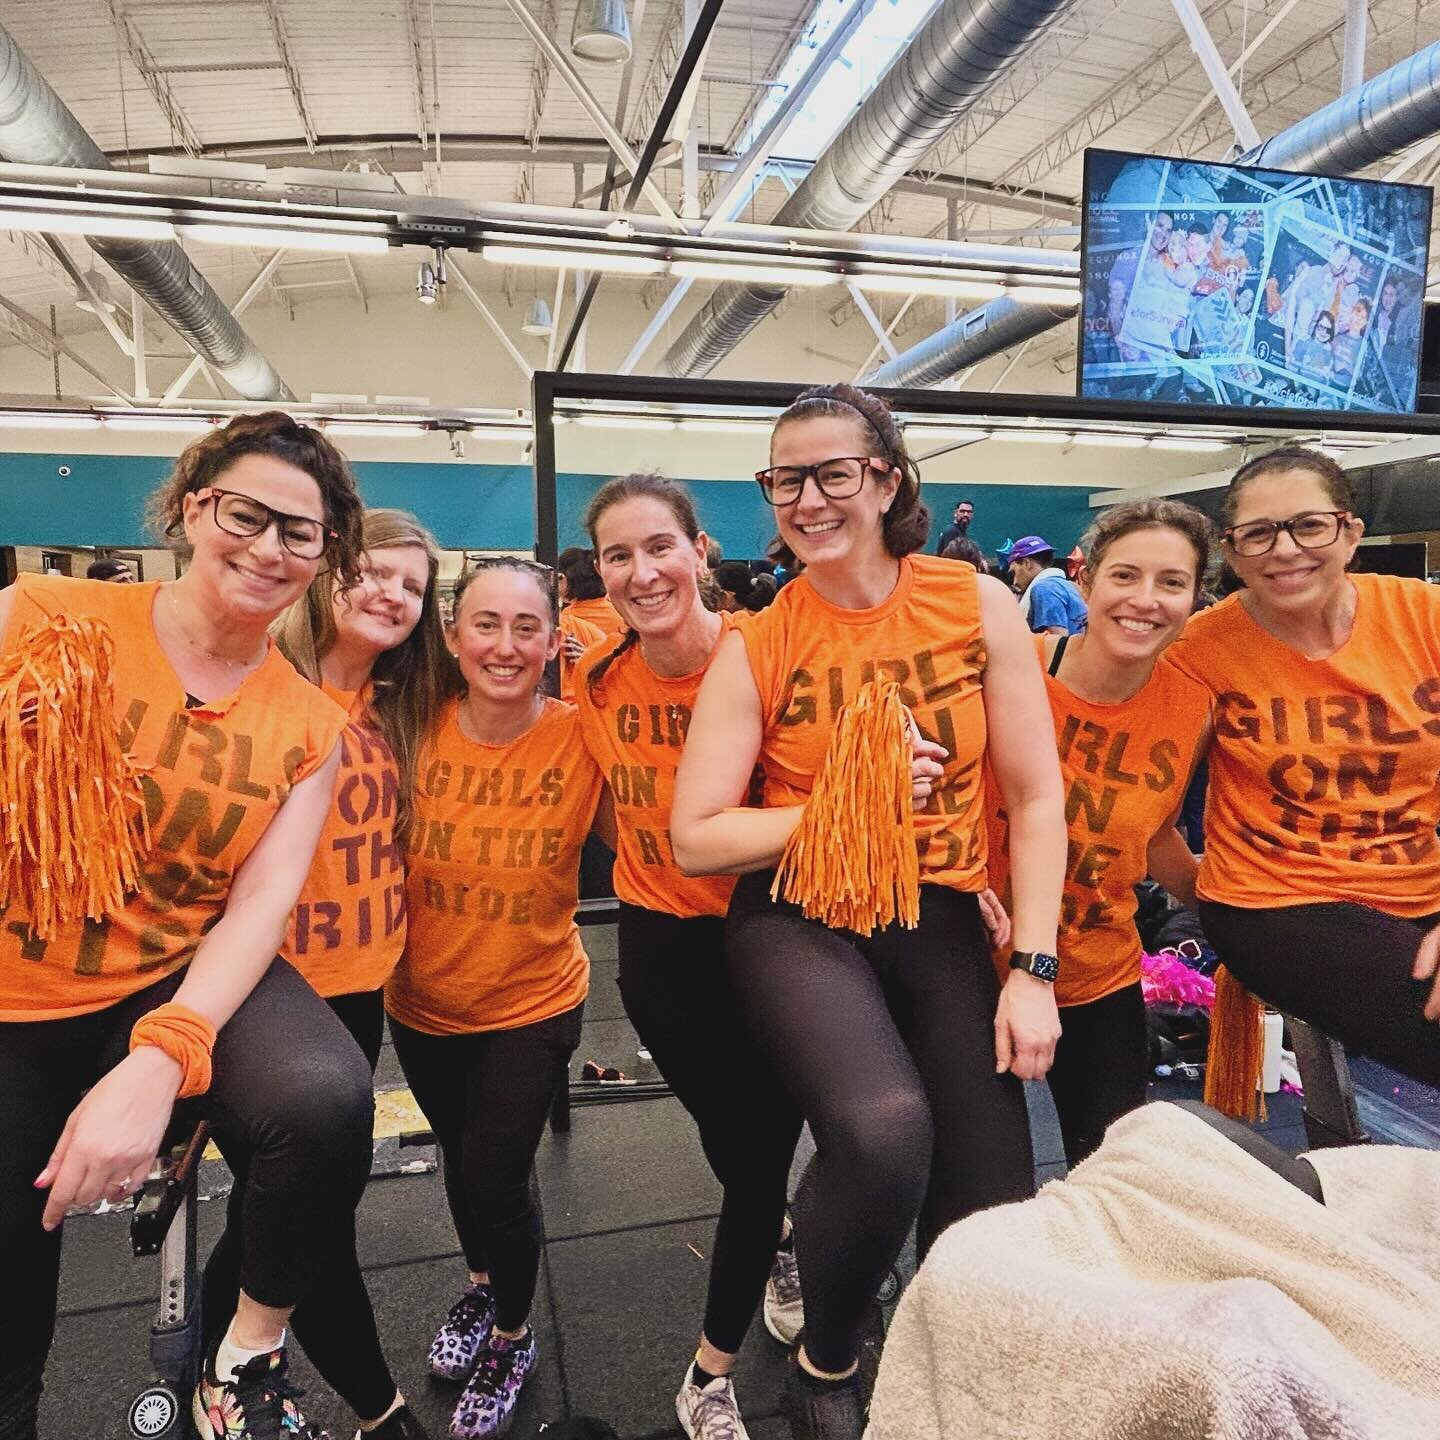 What an emotional day. If you and your loved ones have your health, thank your lucky stars. THANK YOU to all who contributed @cycleforsurvival and @memorialsloankettering grateful for all you do 🙏🧡 #cycleforsurvival #beatrarecancers #fuckcancer